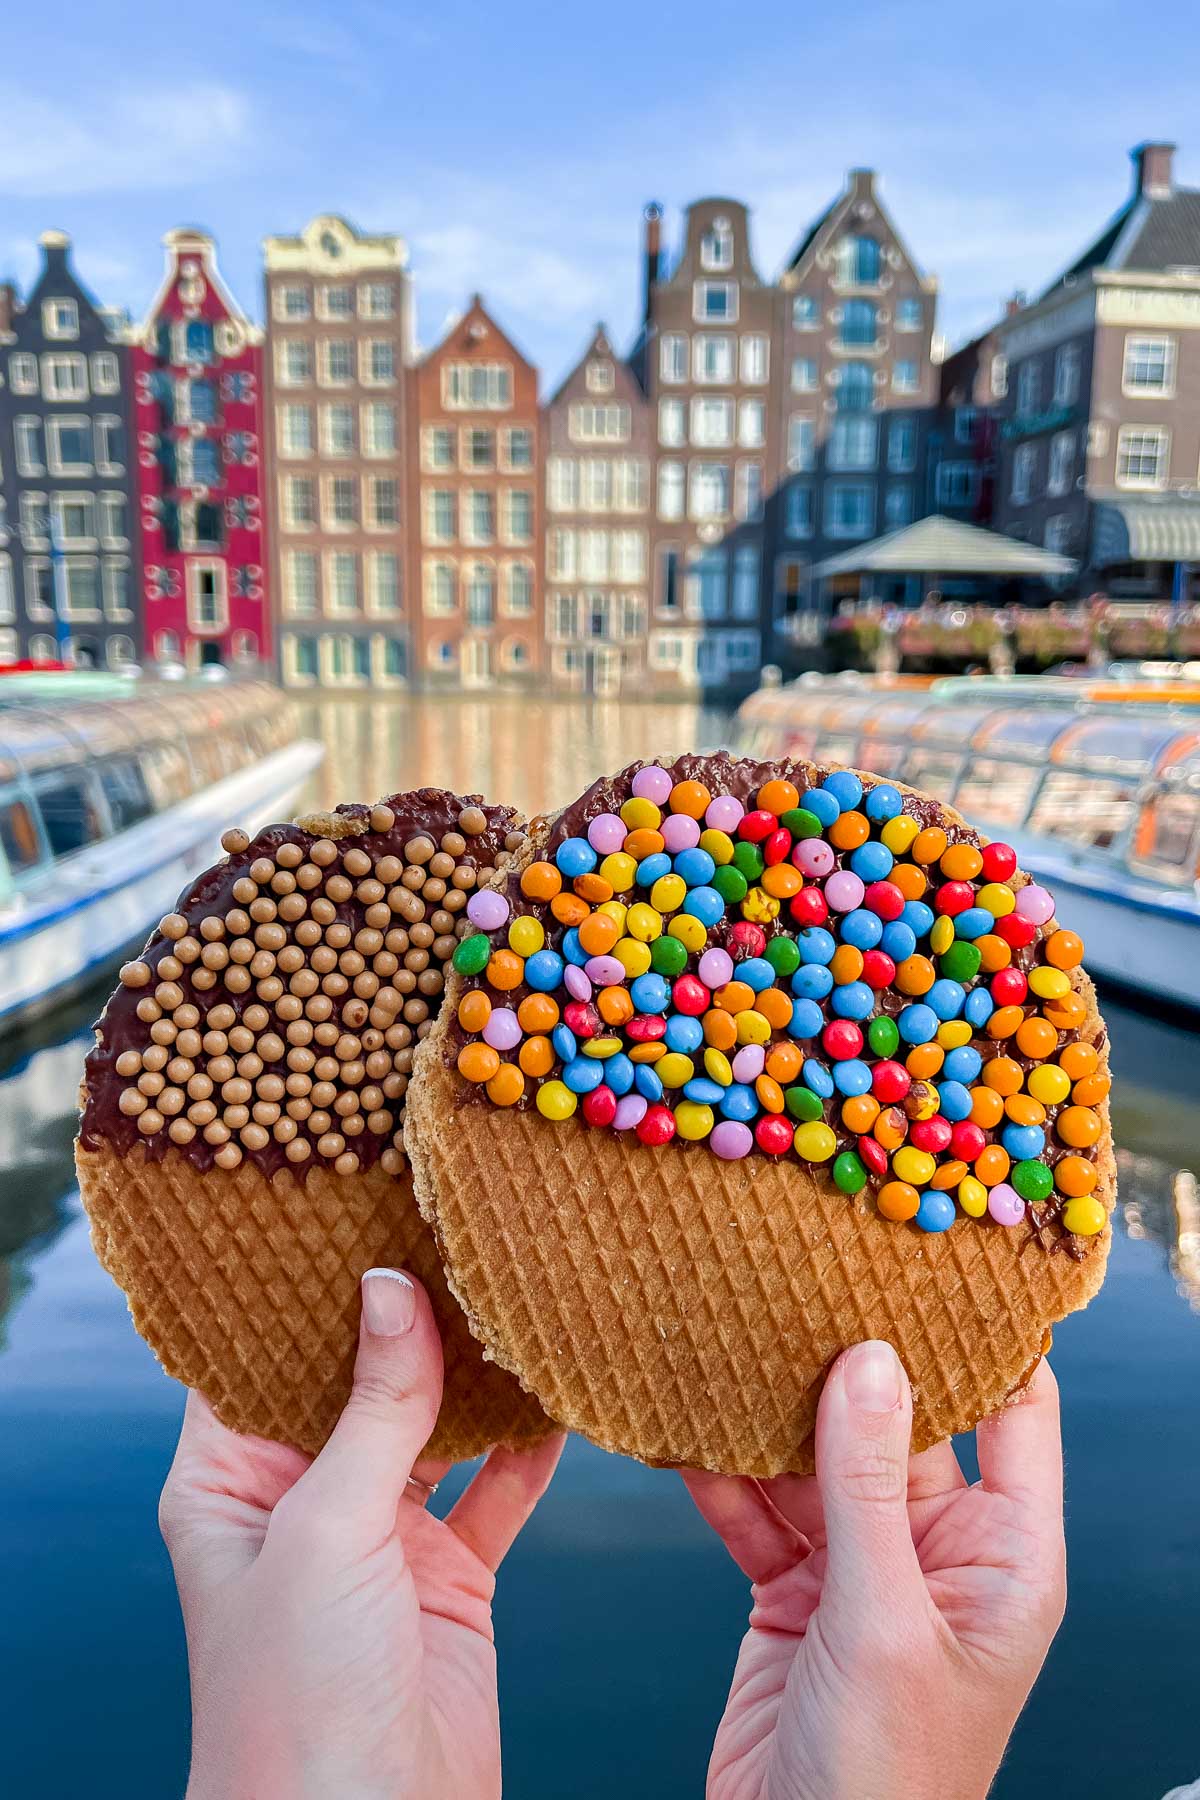 Stroopwafels at the Damrak Canal Houses Amsterdam